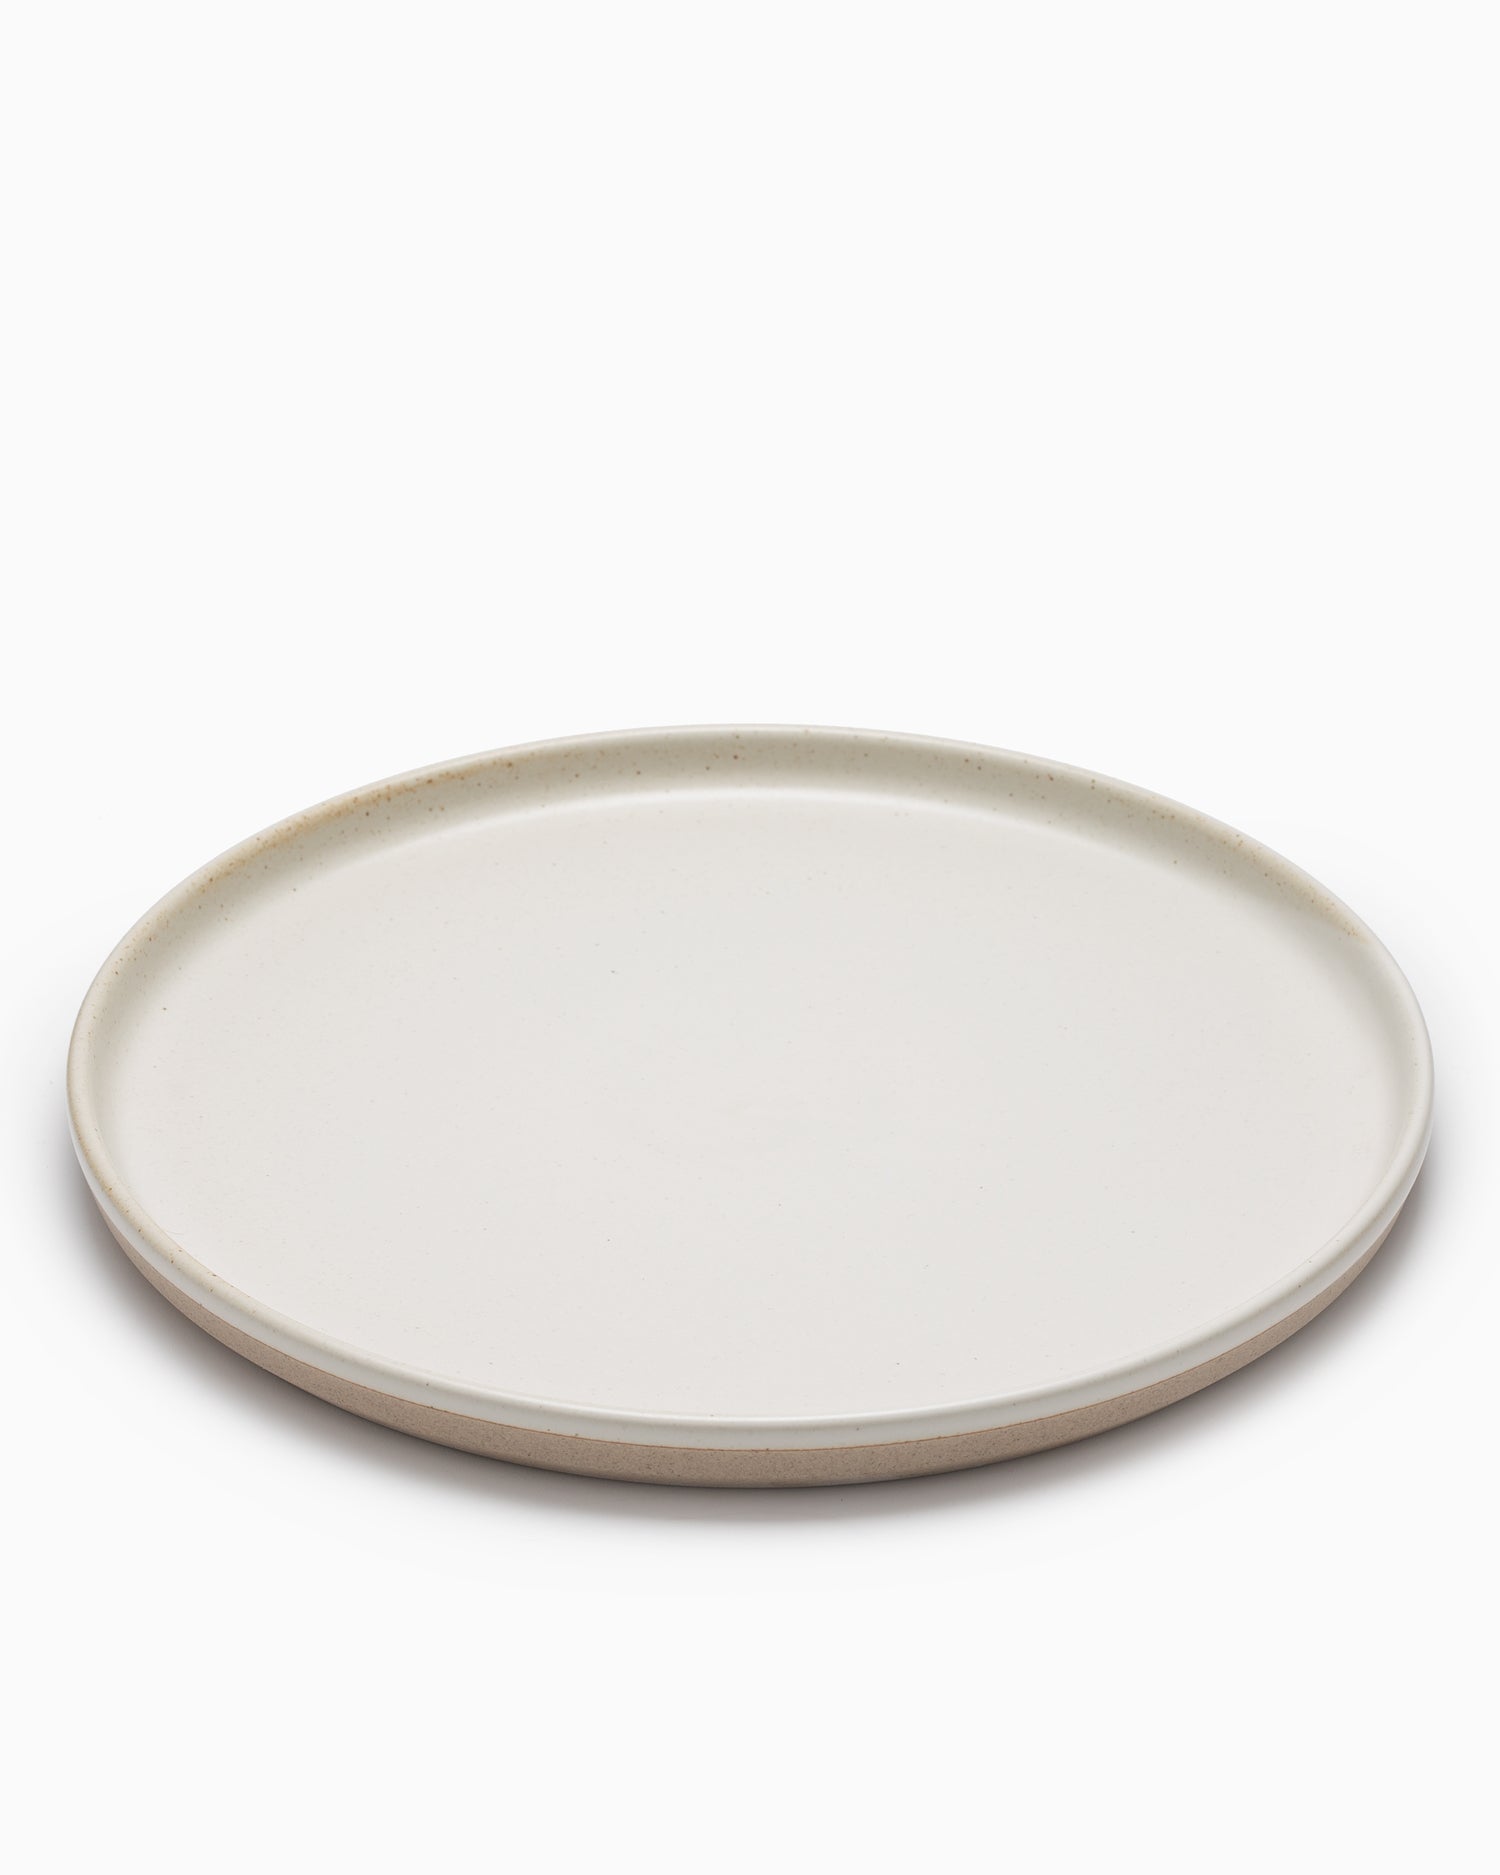 CLK-151 Large Plate - White